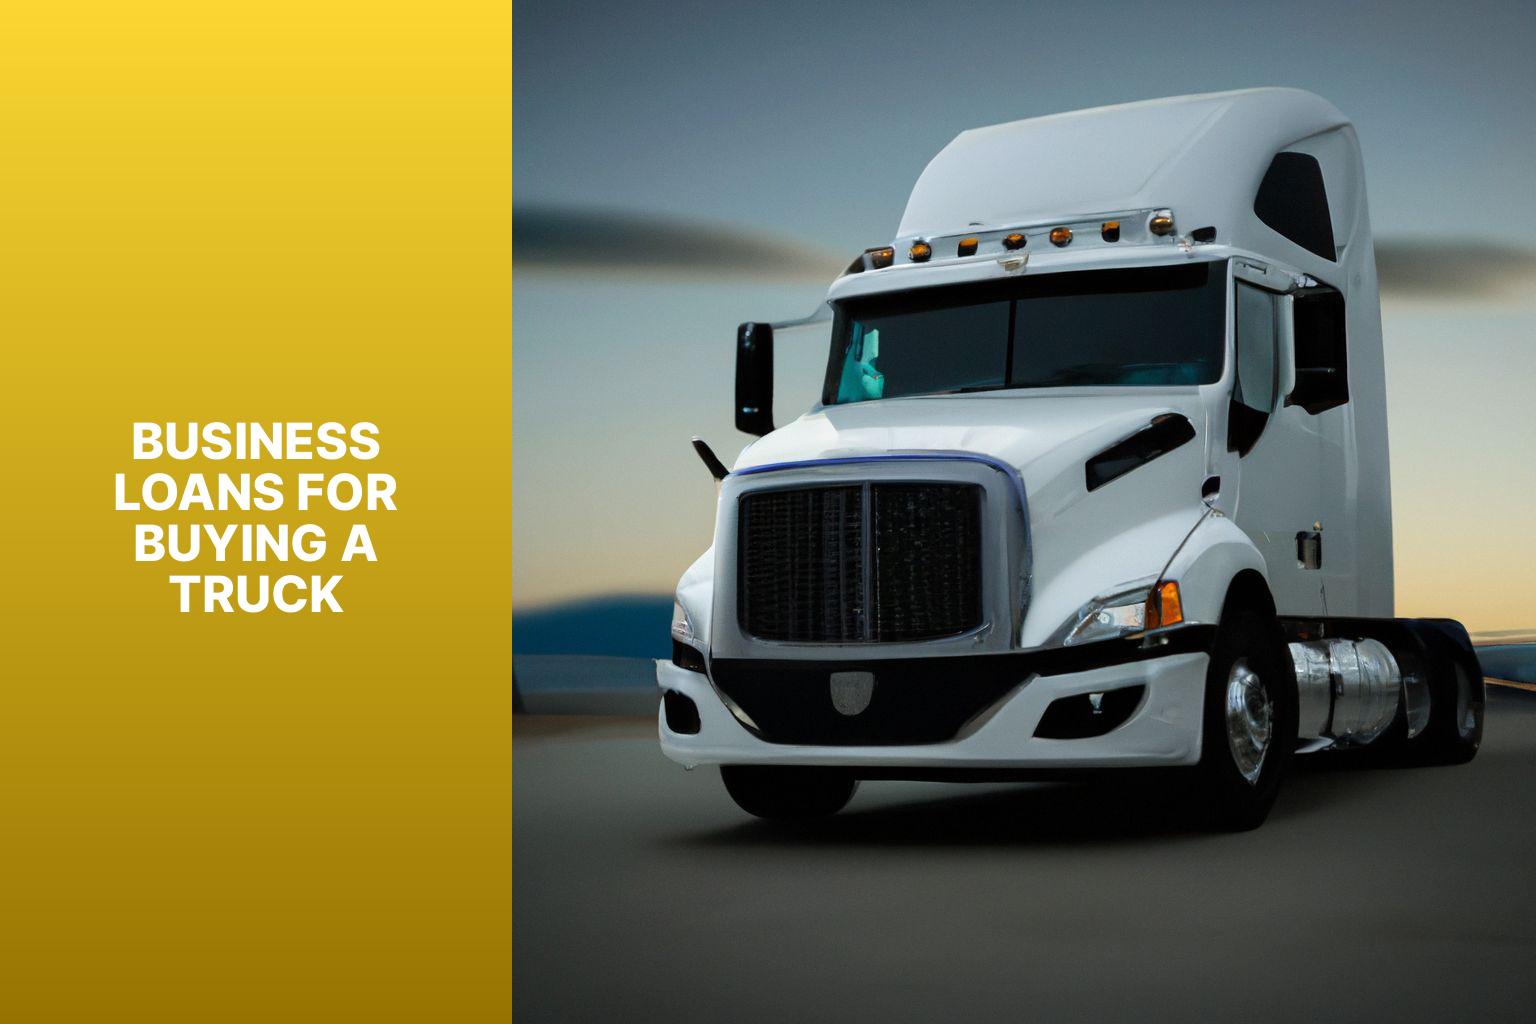 Business Loans for Buying a Truck - Trucks and Capital: Can You Buy a Truck with a Business Loan? 